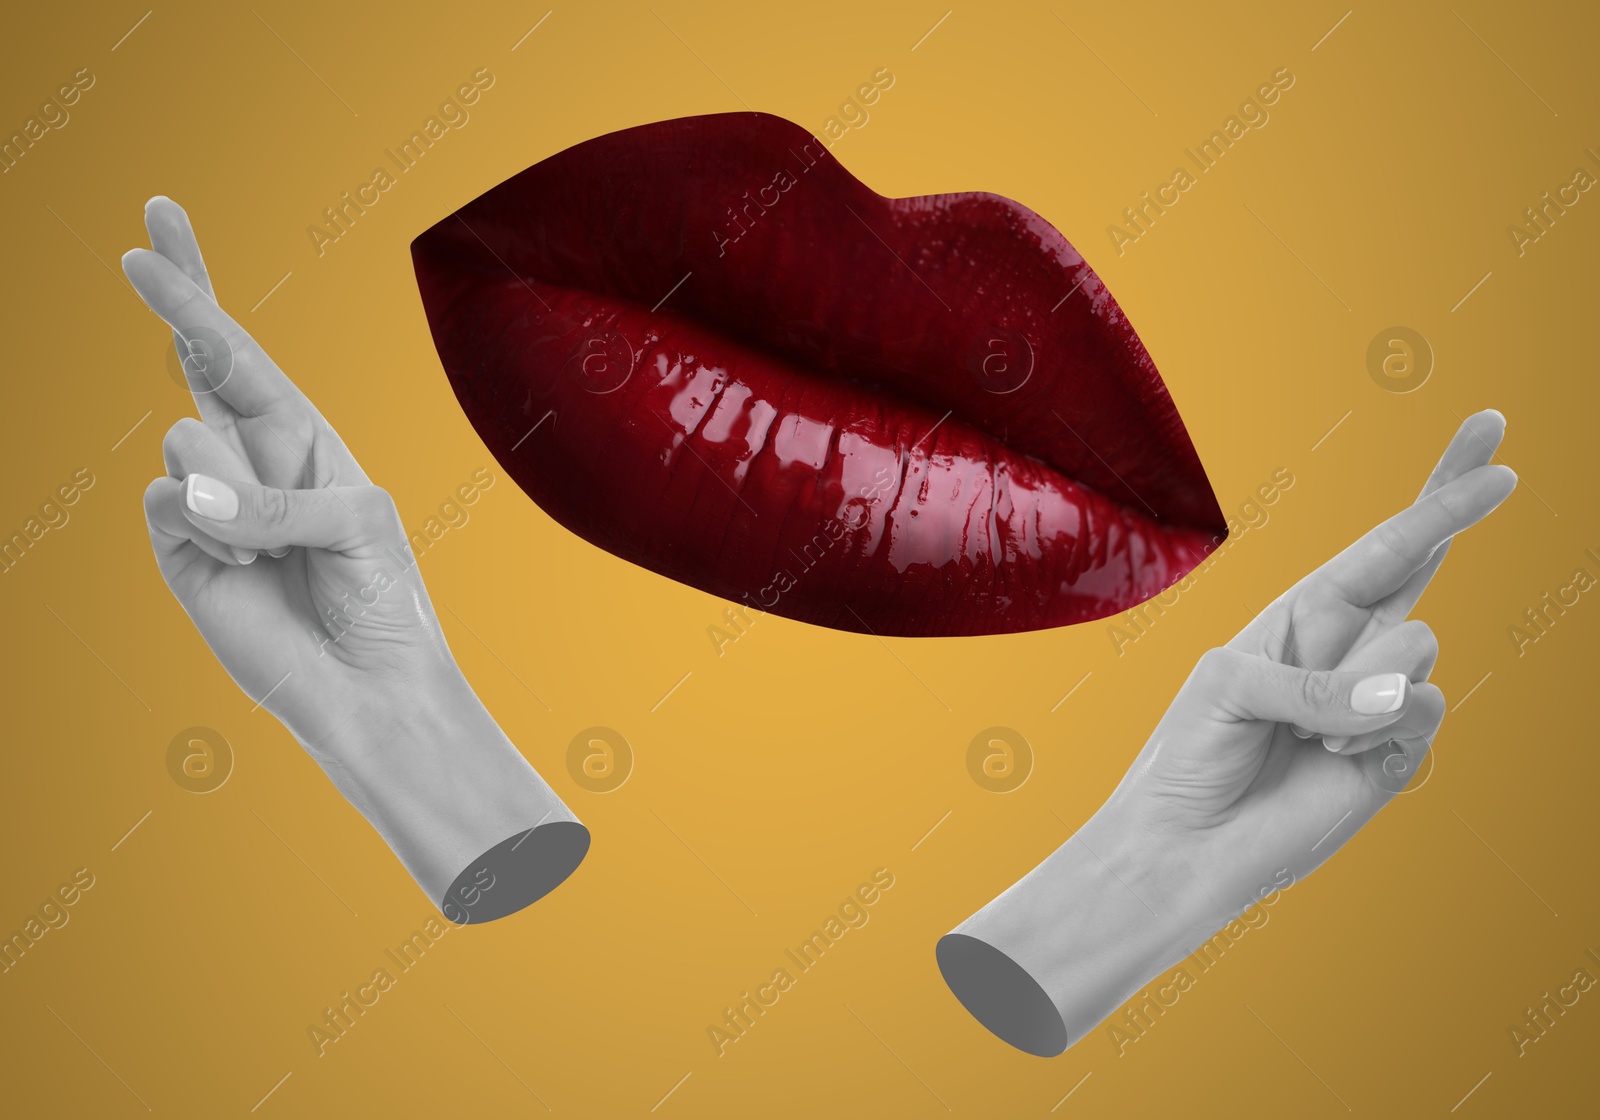 Image of Female lips and hands with crossed fingers on golden background, stylish art collage